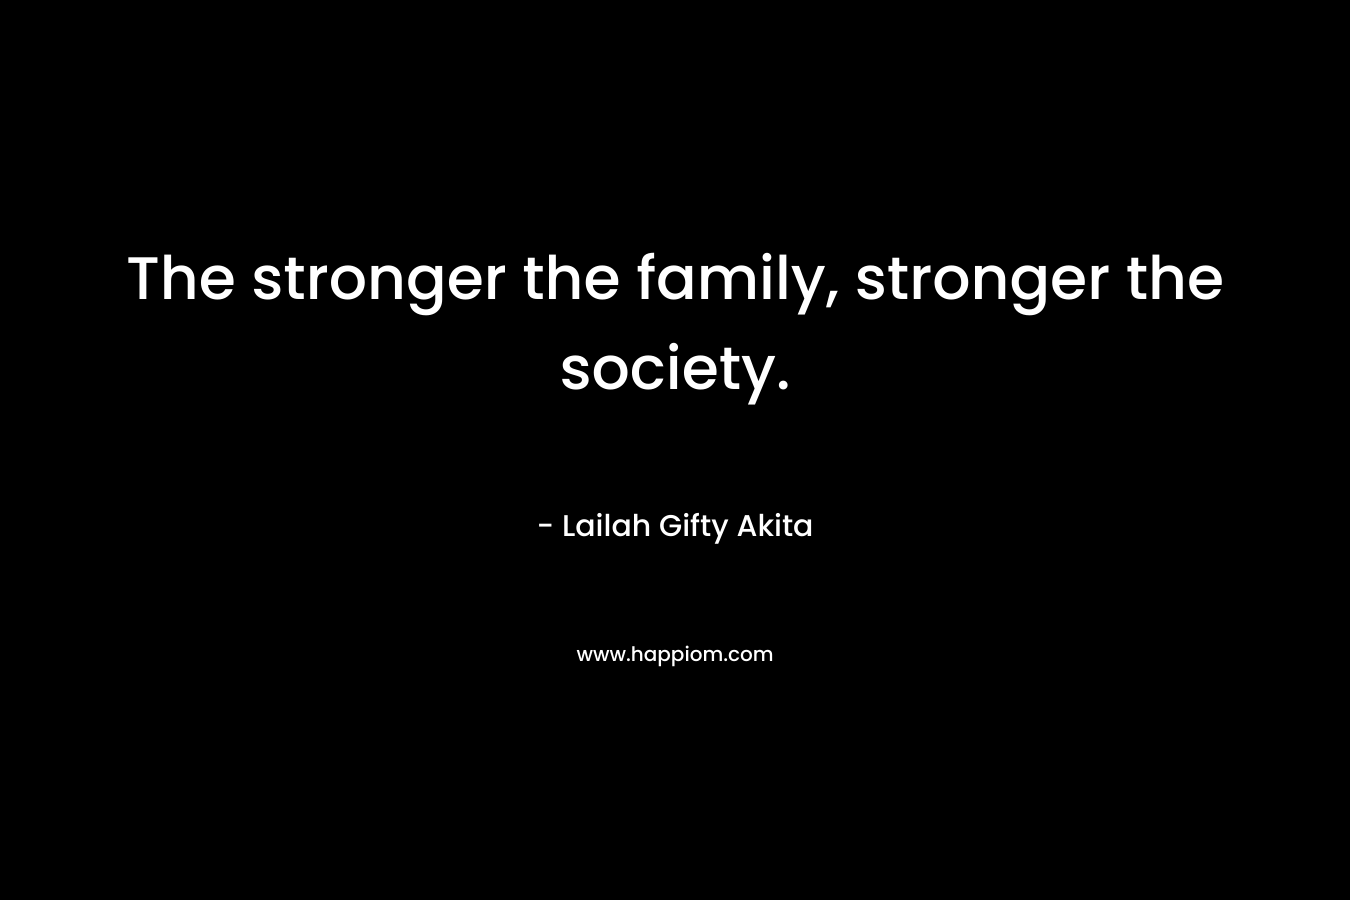 The stronger the family, stronger the society.